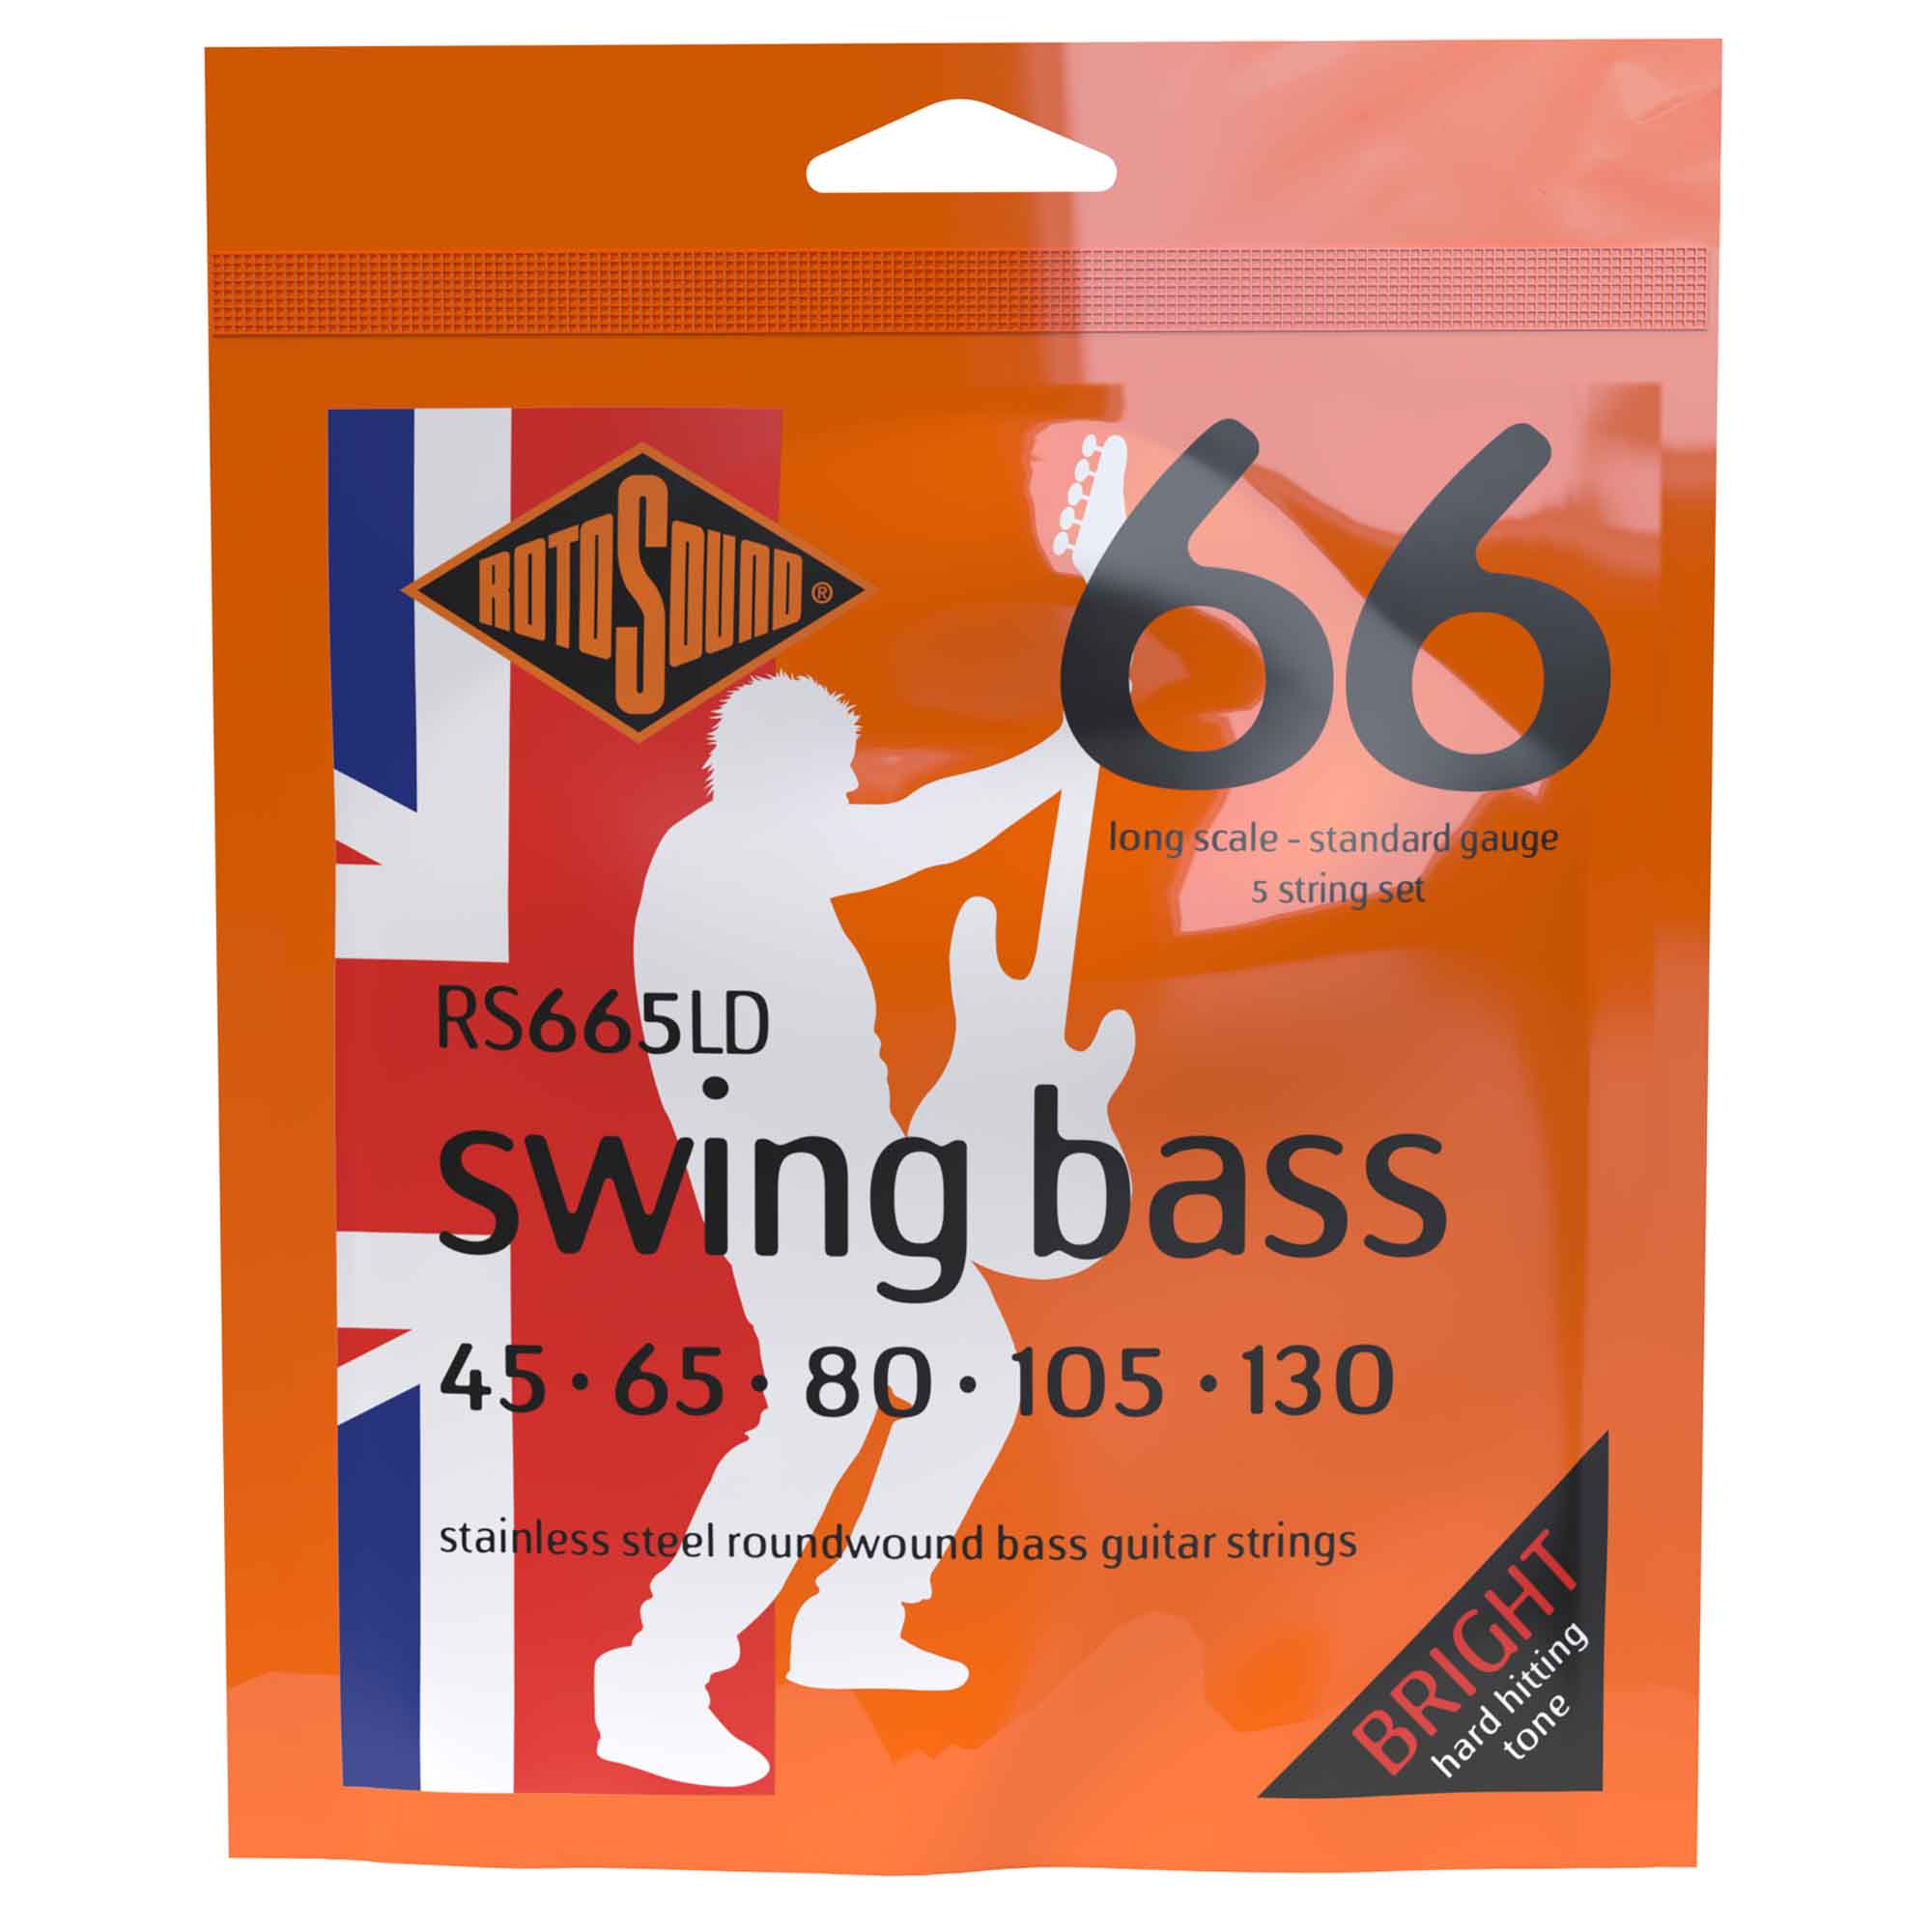 Rotosound Swing Bass Stainless Steel 45-130 Bass Guitar Strings, Long Scale [RS665LD]